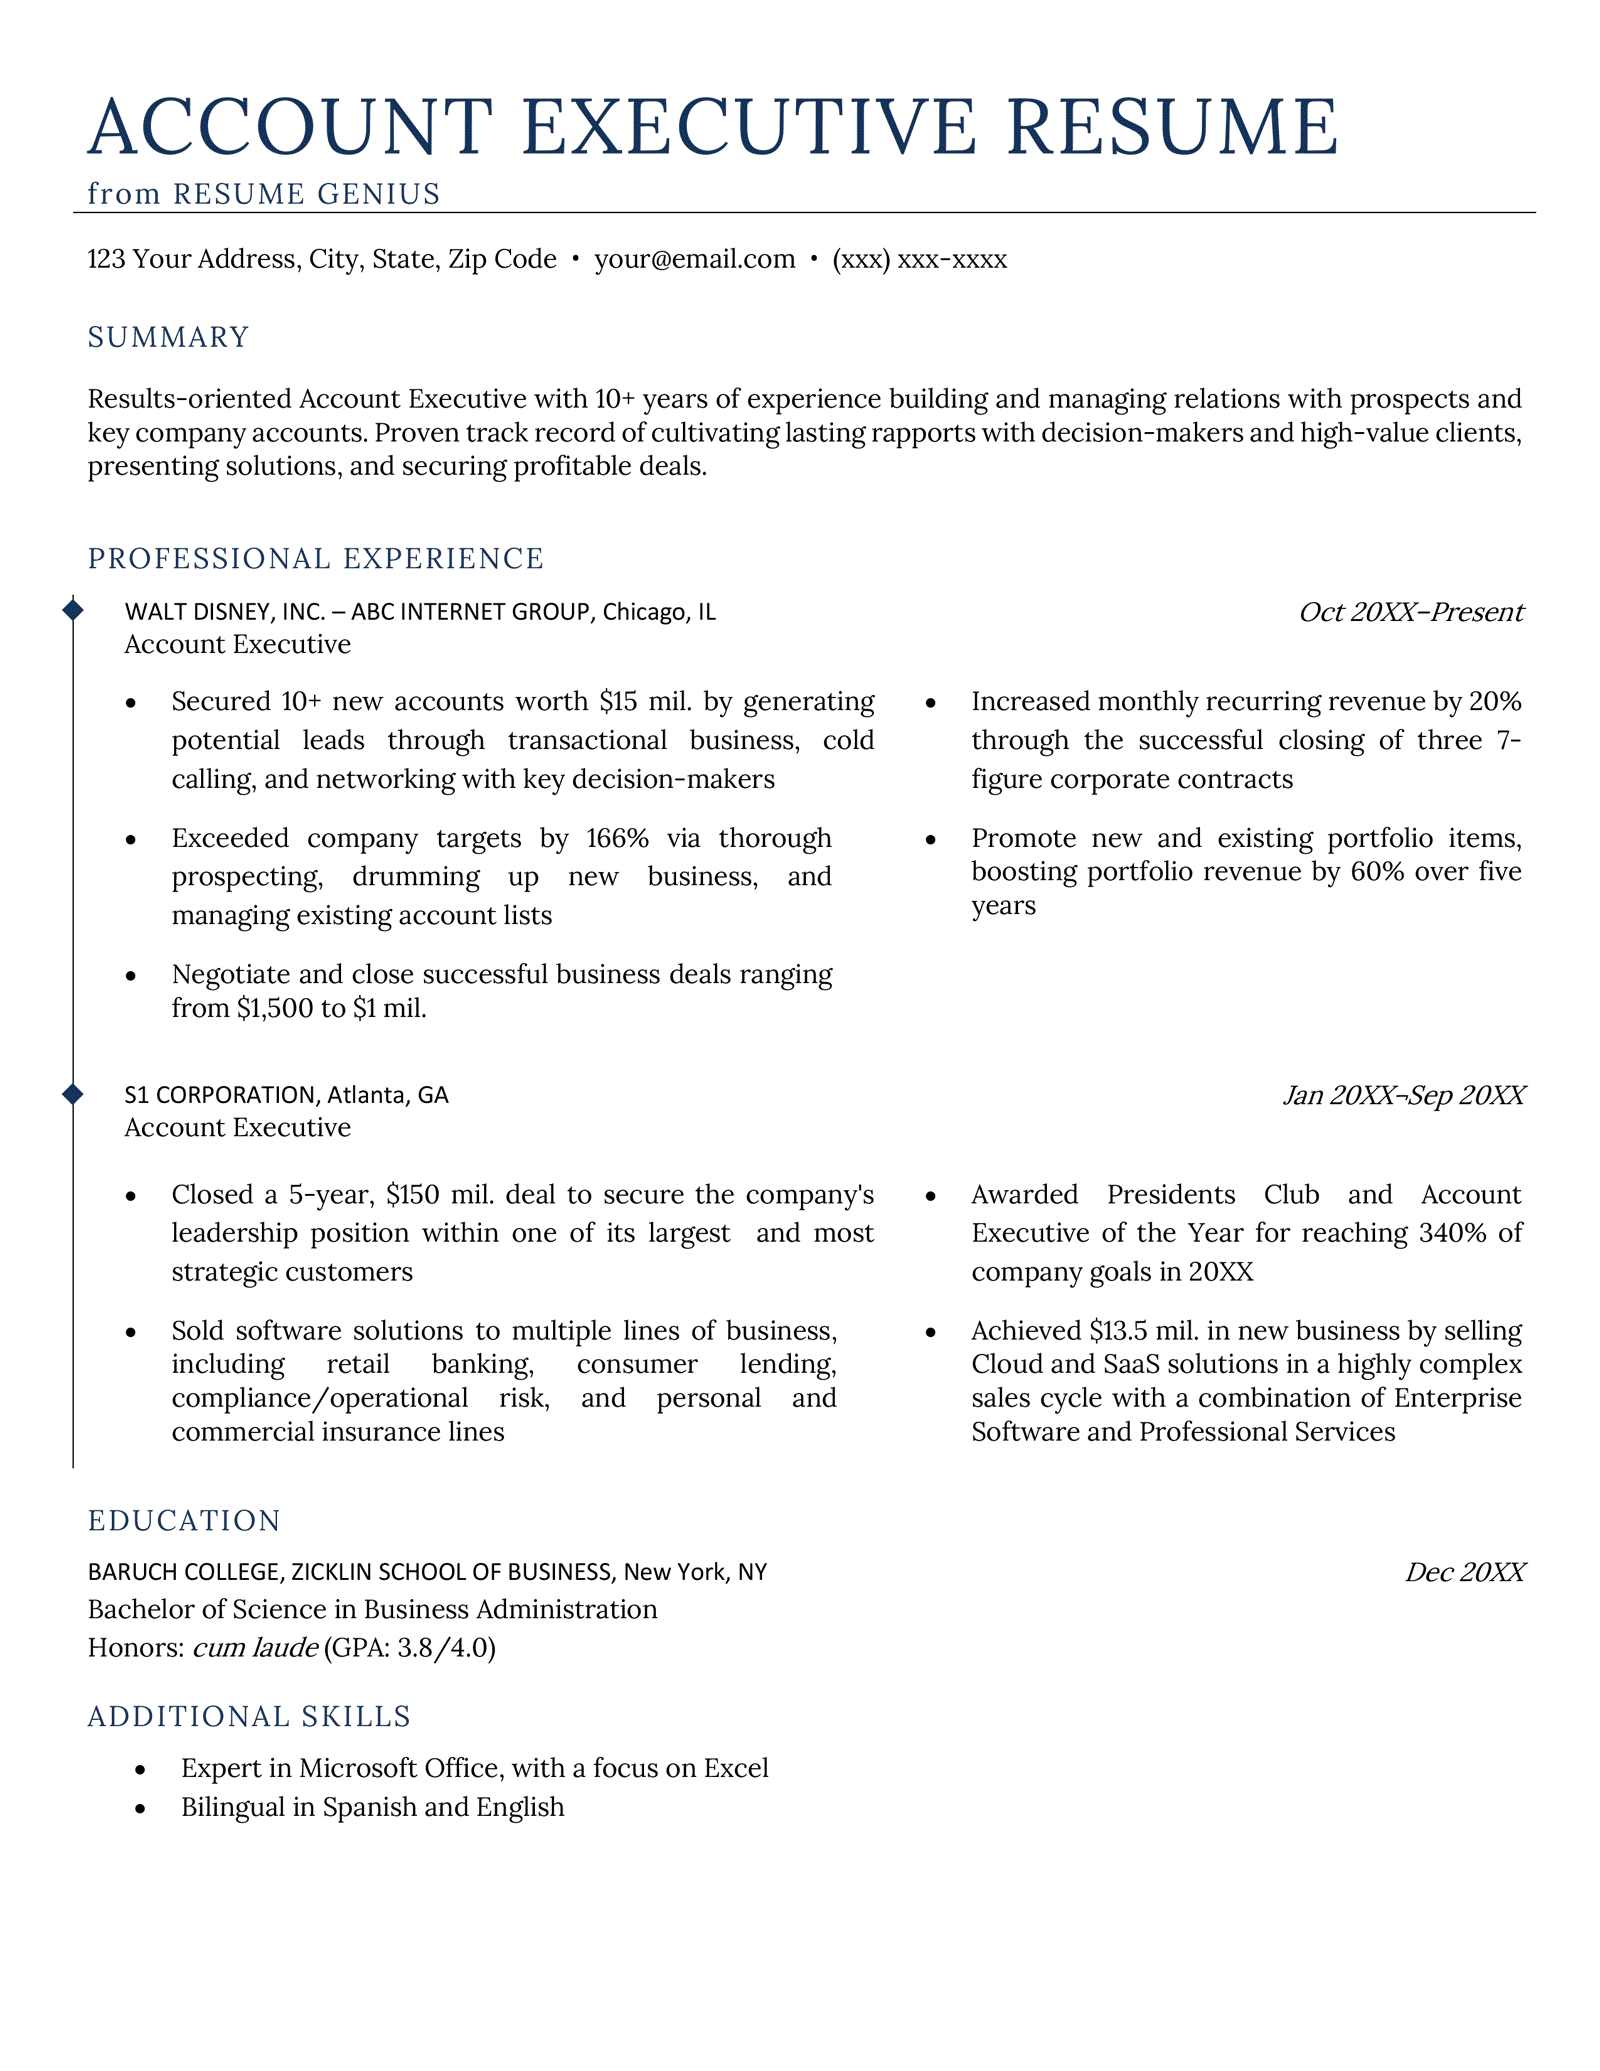 An account executive resume sample with sections for the applicant's resume summary, work experience, education, and additional skills